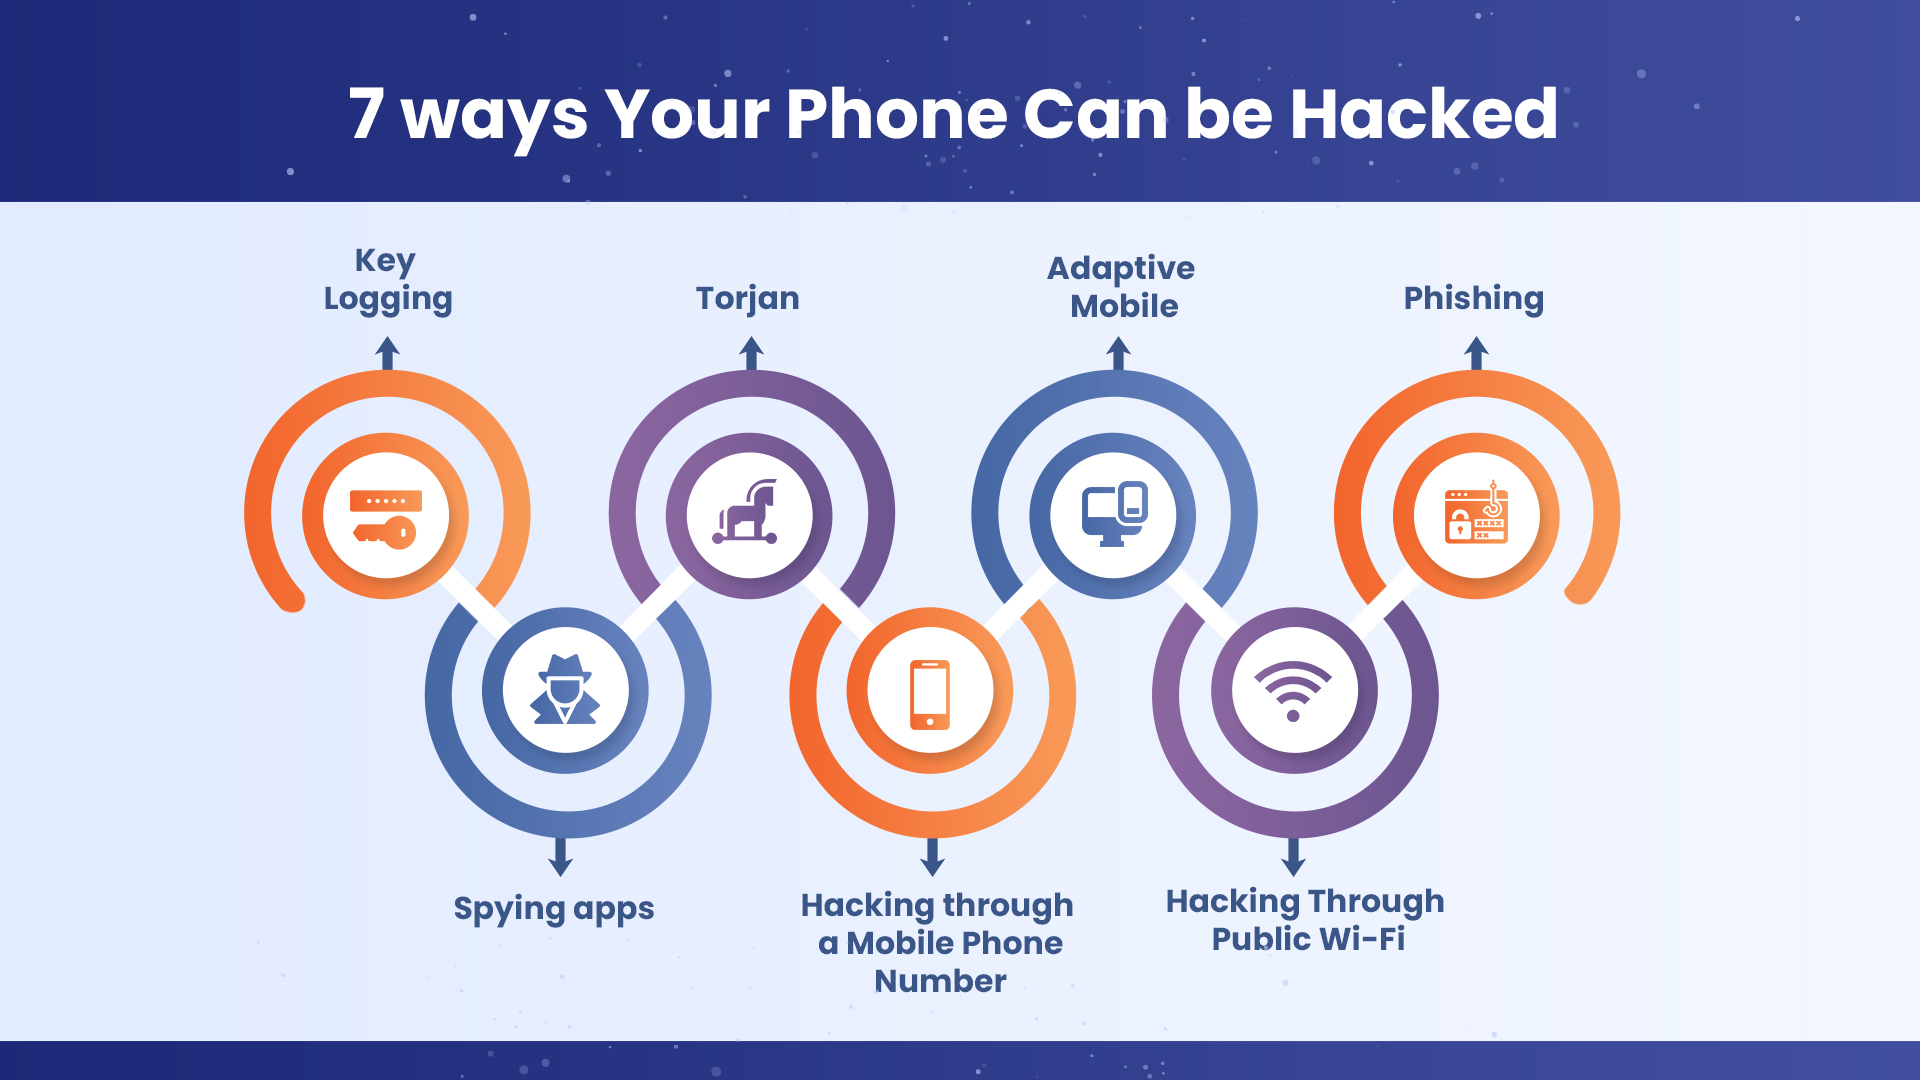 How your phone can be hacked